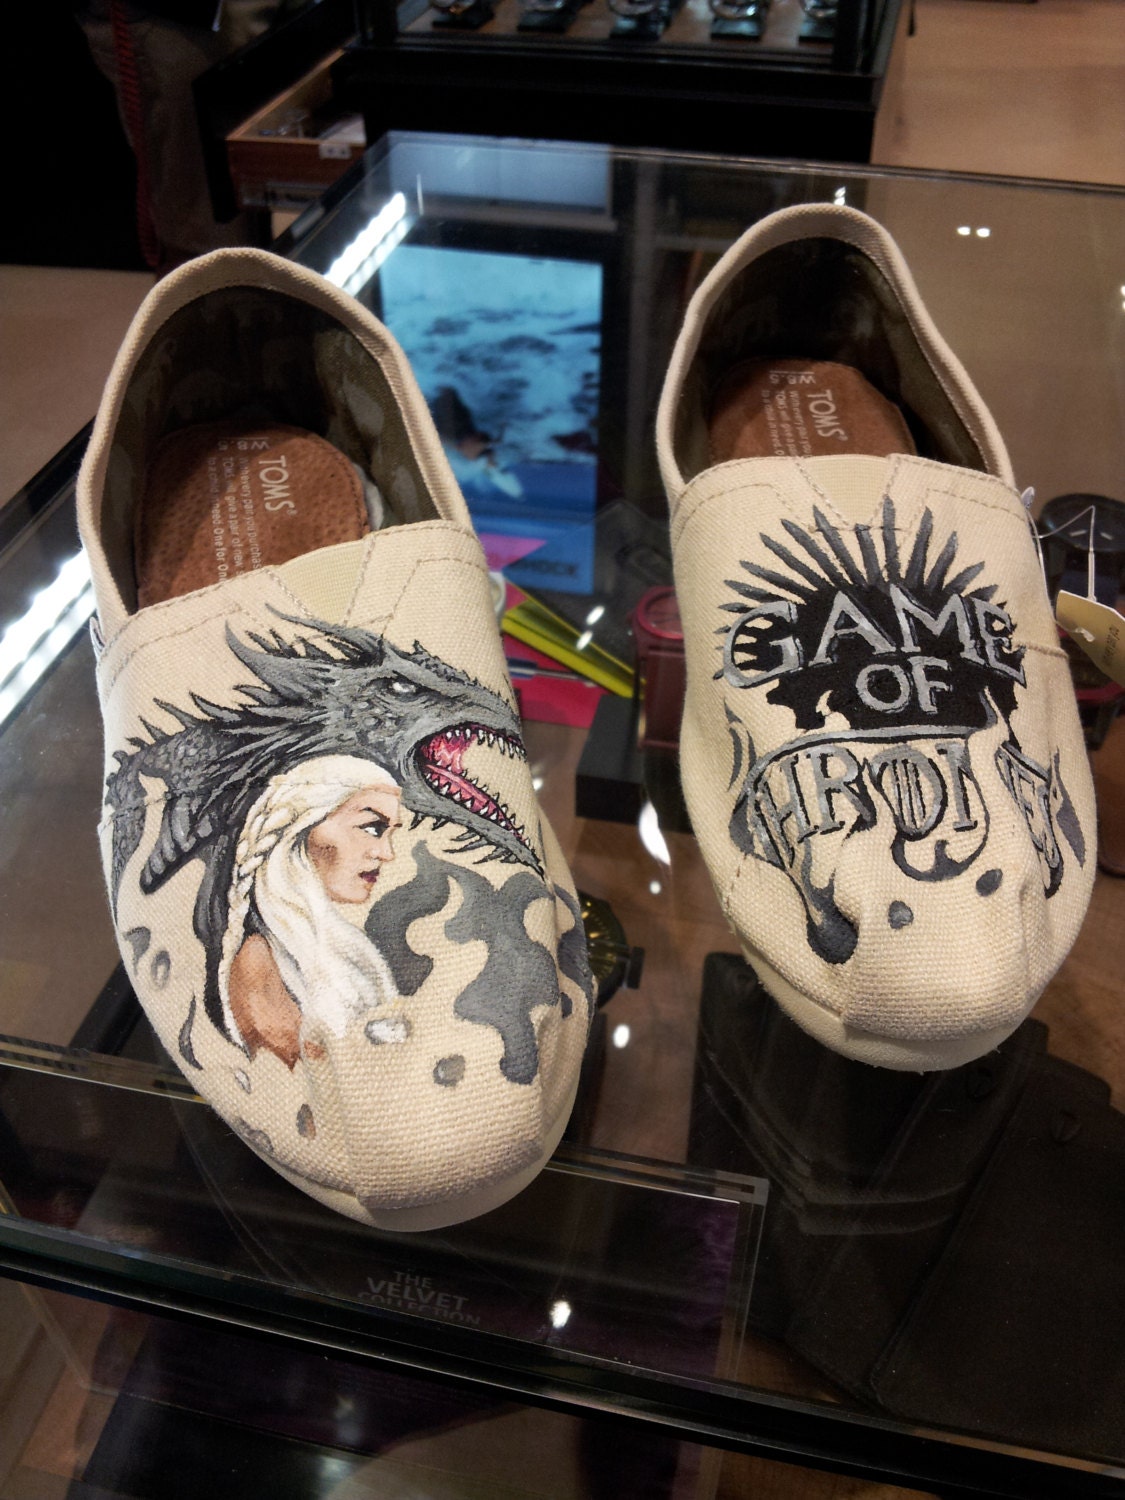 Toms Shoes Game of Thrones - Etsy Hong Kong